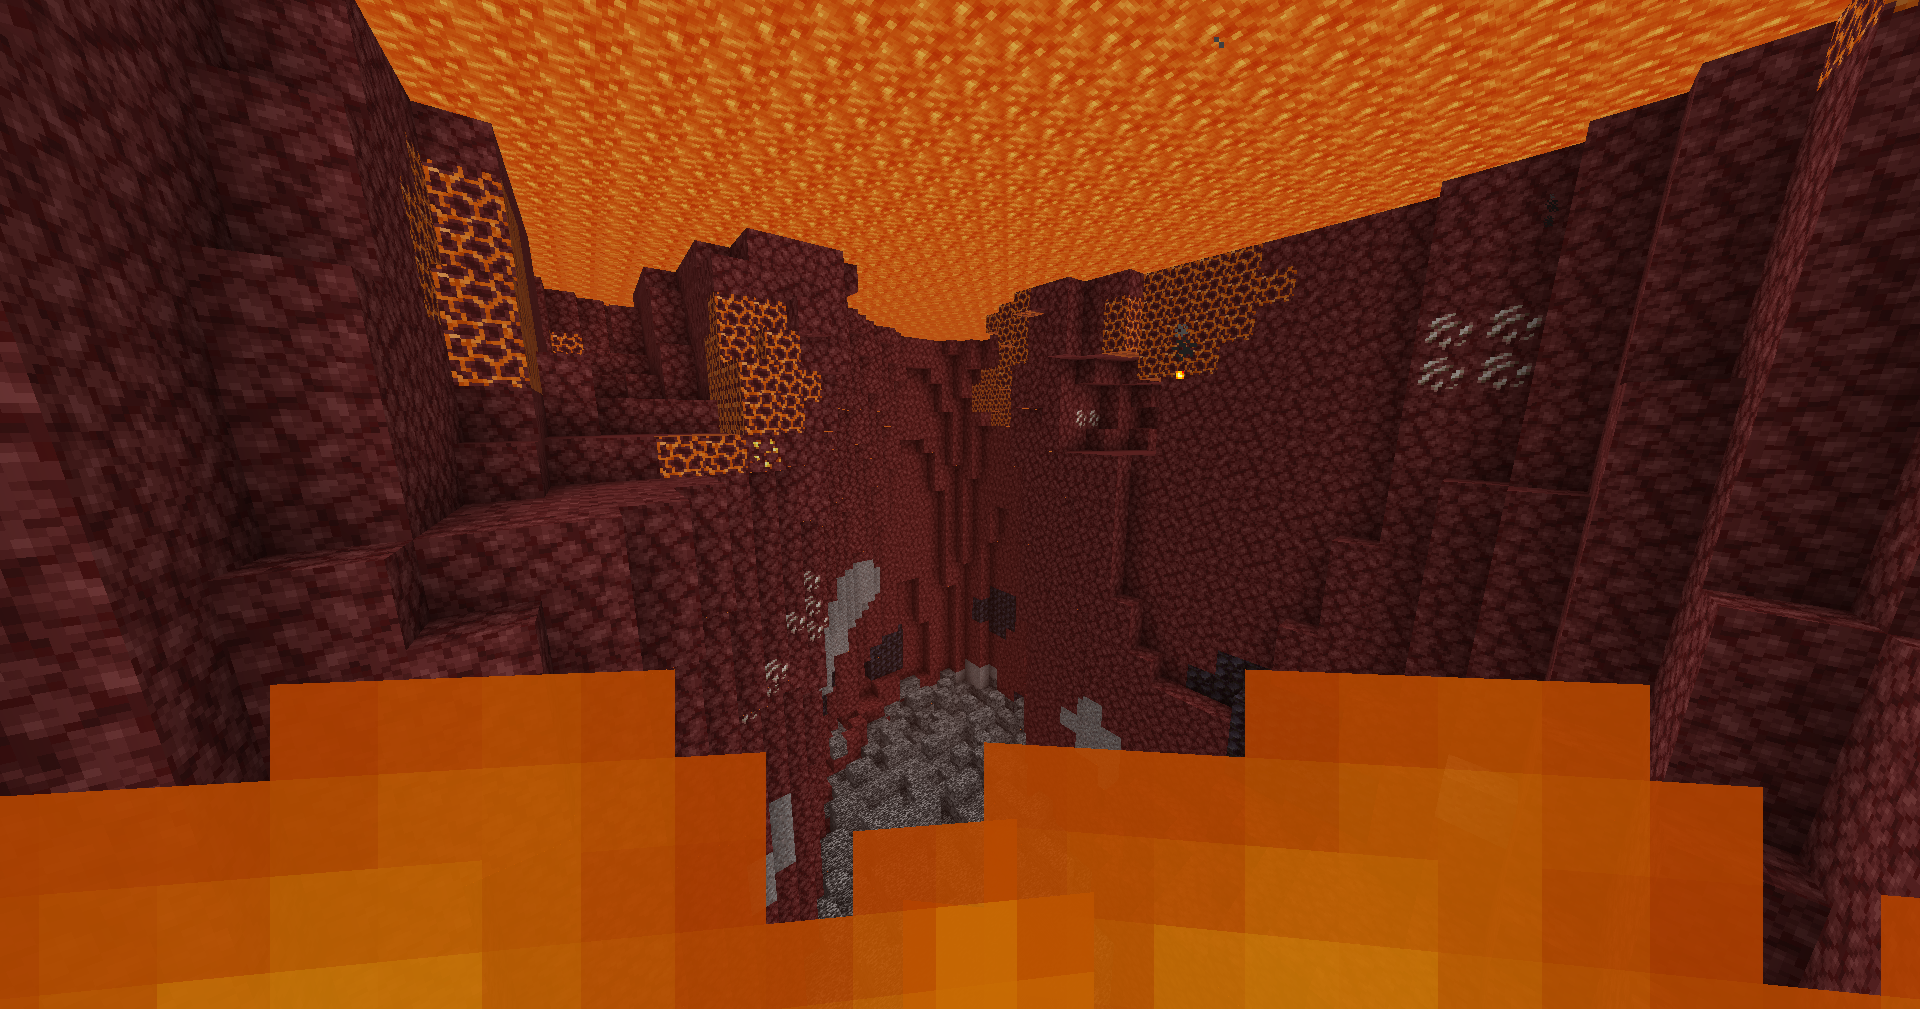 You can see clearly under Lava